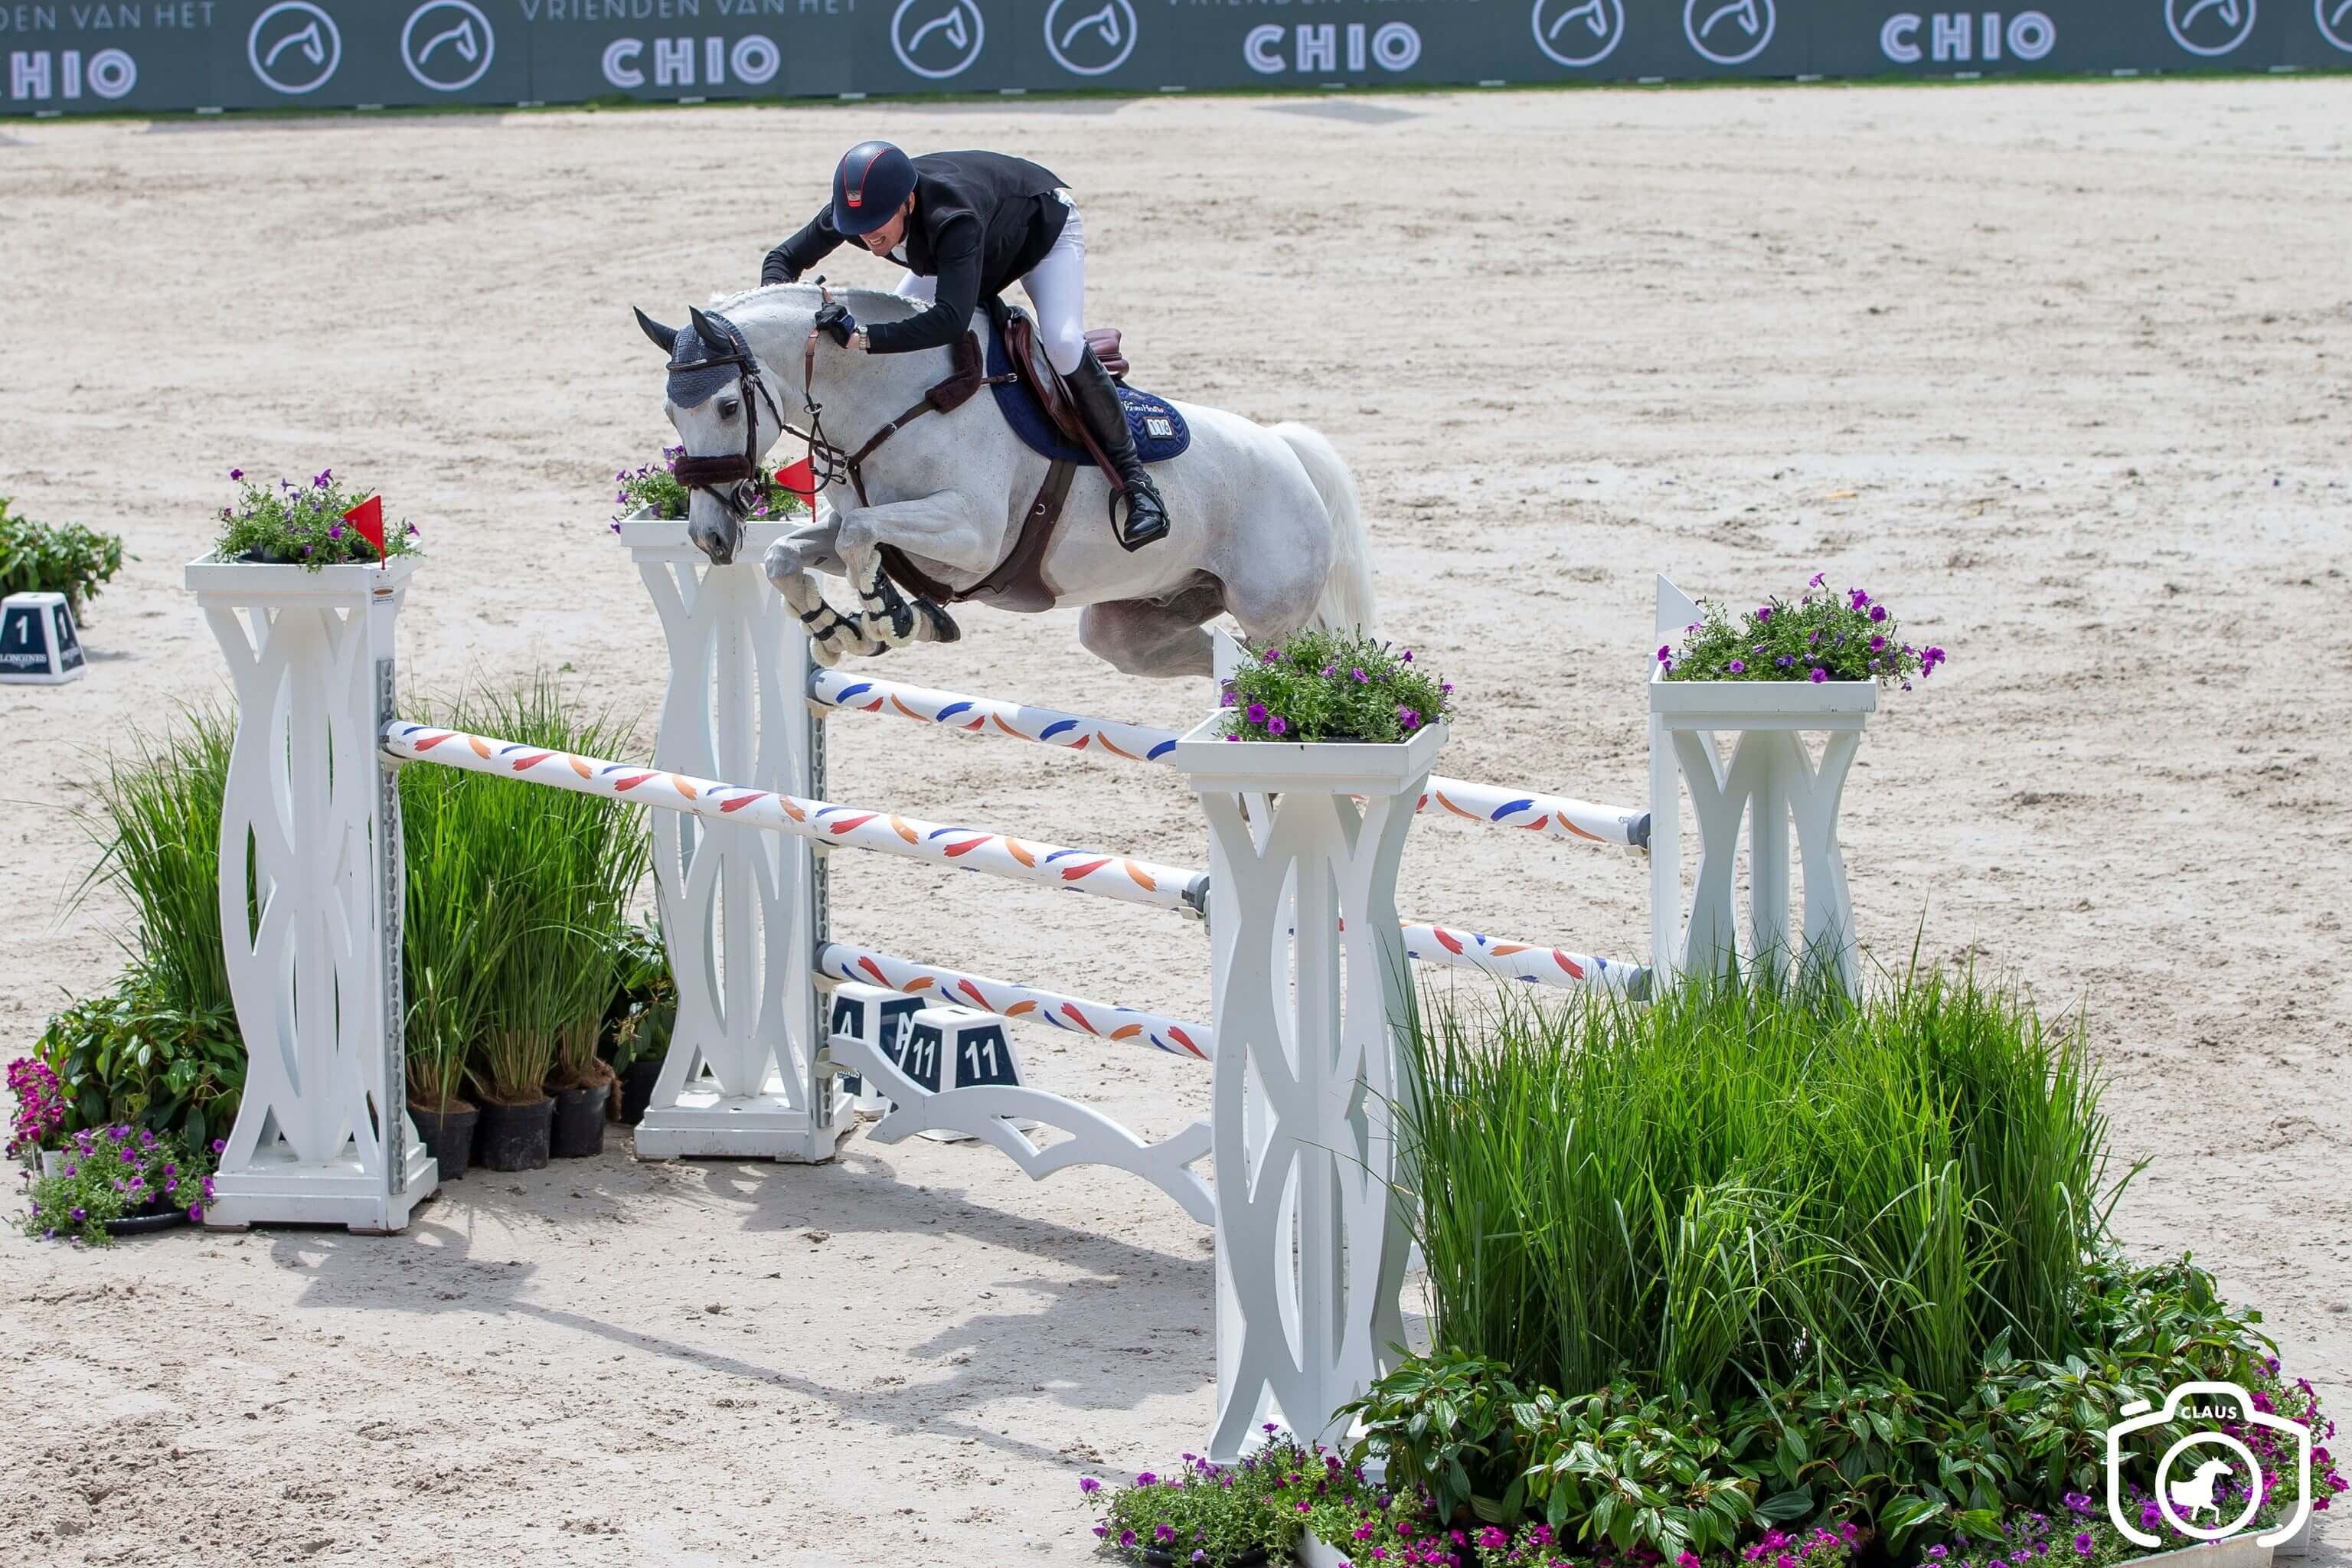 Thrills and Triumphs: Jos Verlooy wins the CSI3* 1.50m Jumping in Polo Club St-Tropez